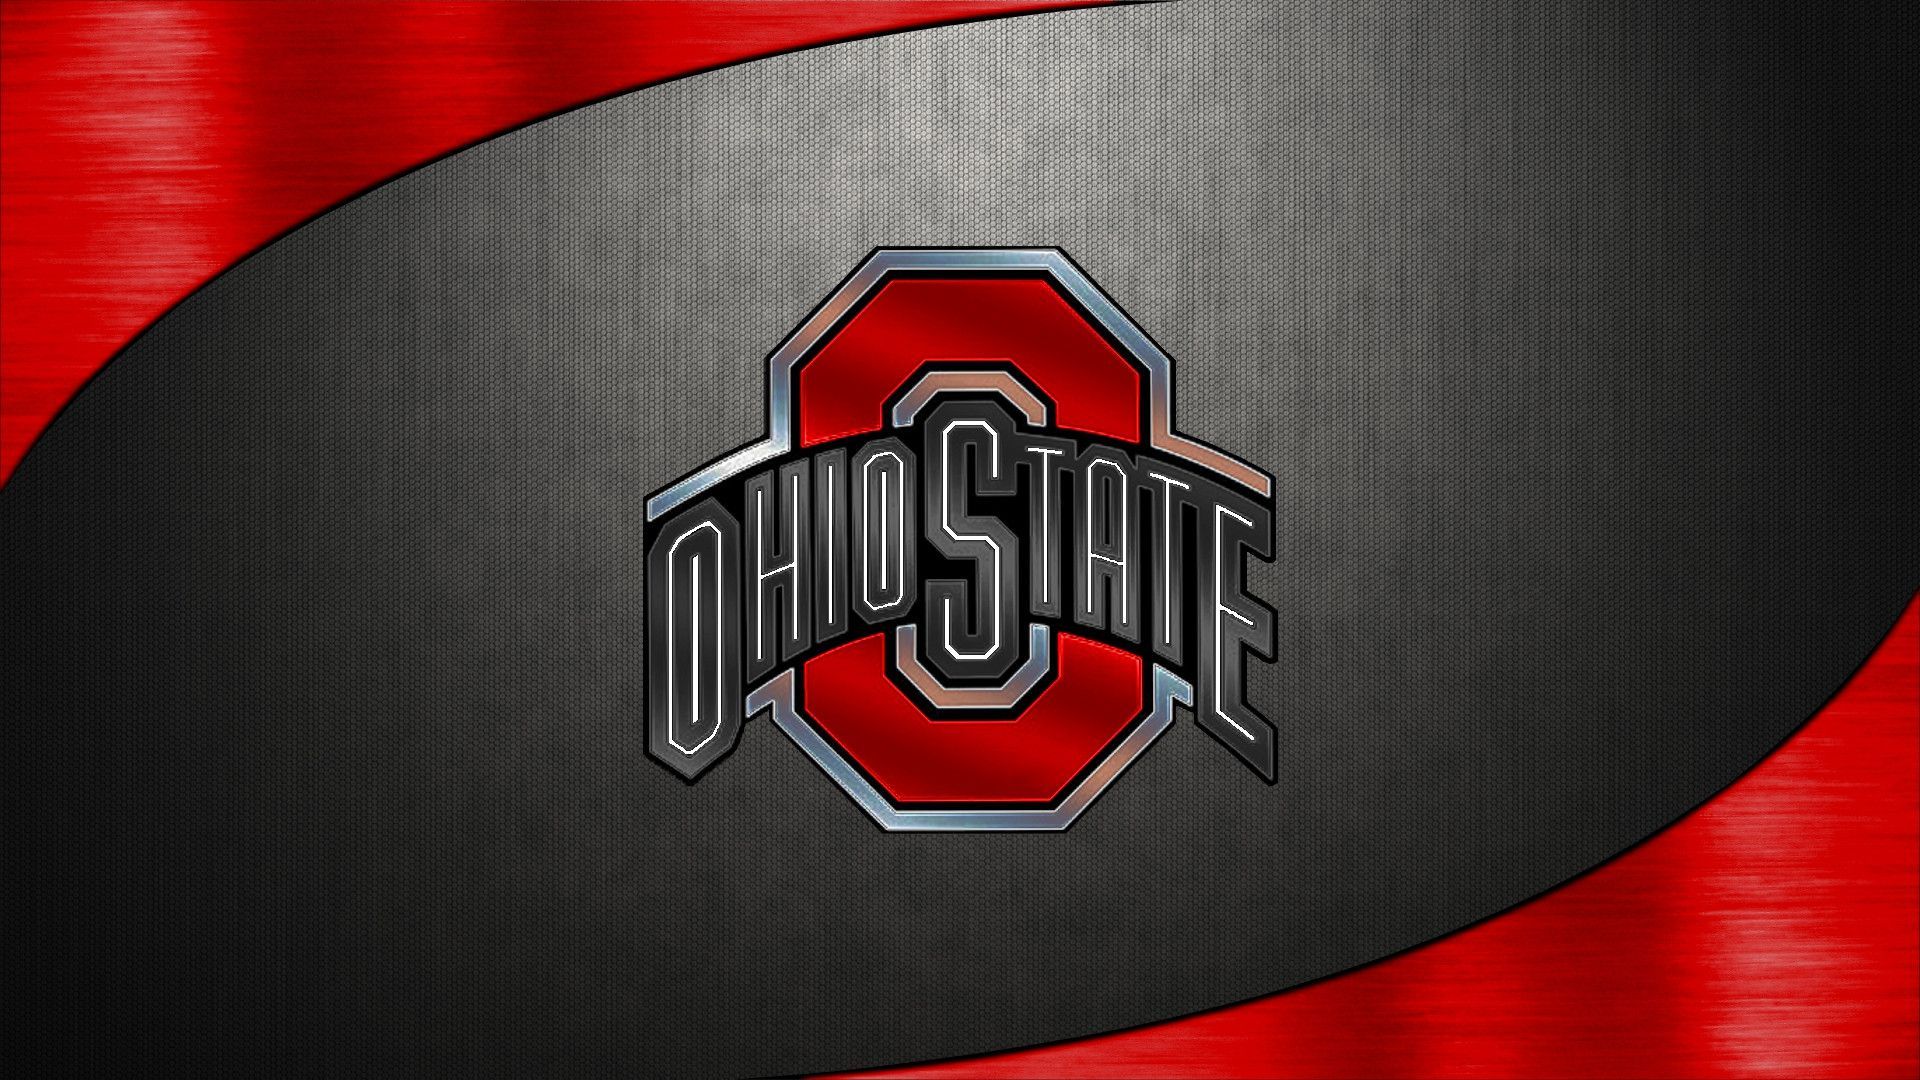 Wallpapers and Schedule Posters  Ohio State Buckeyes